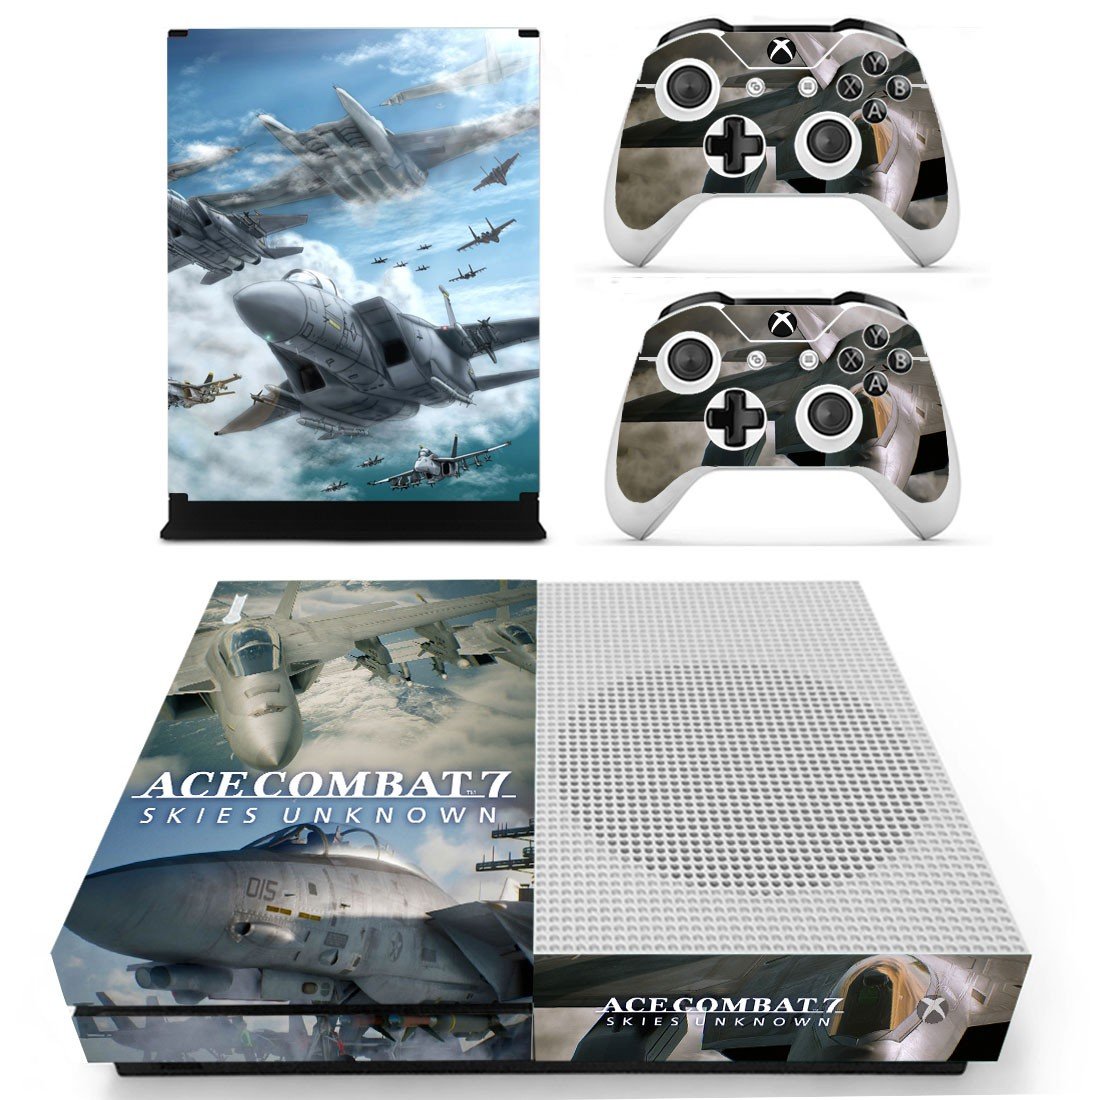 ACE Combat 7 Cover For Xbox One S